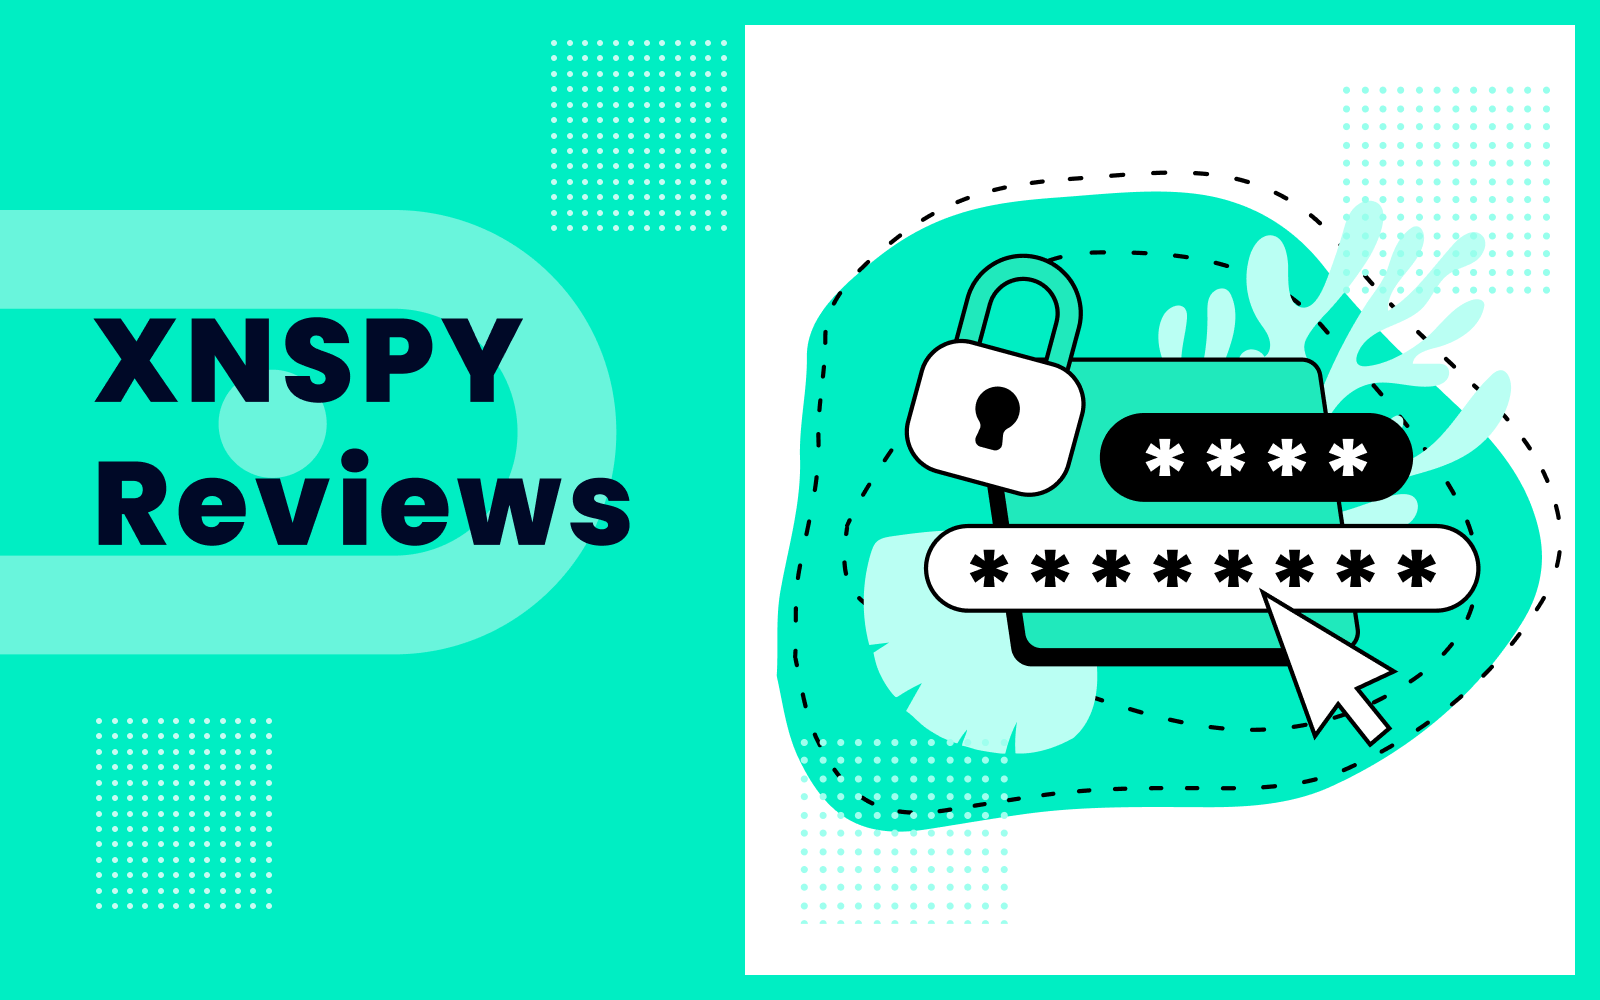 XNSPY Reviews 2022: Is the App Outdated?